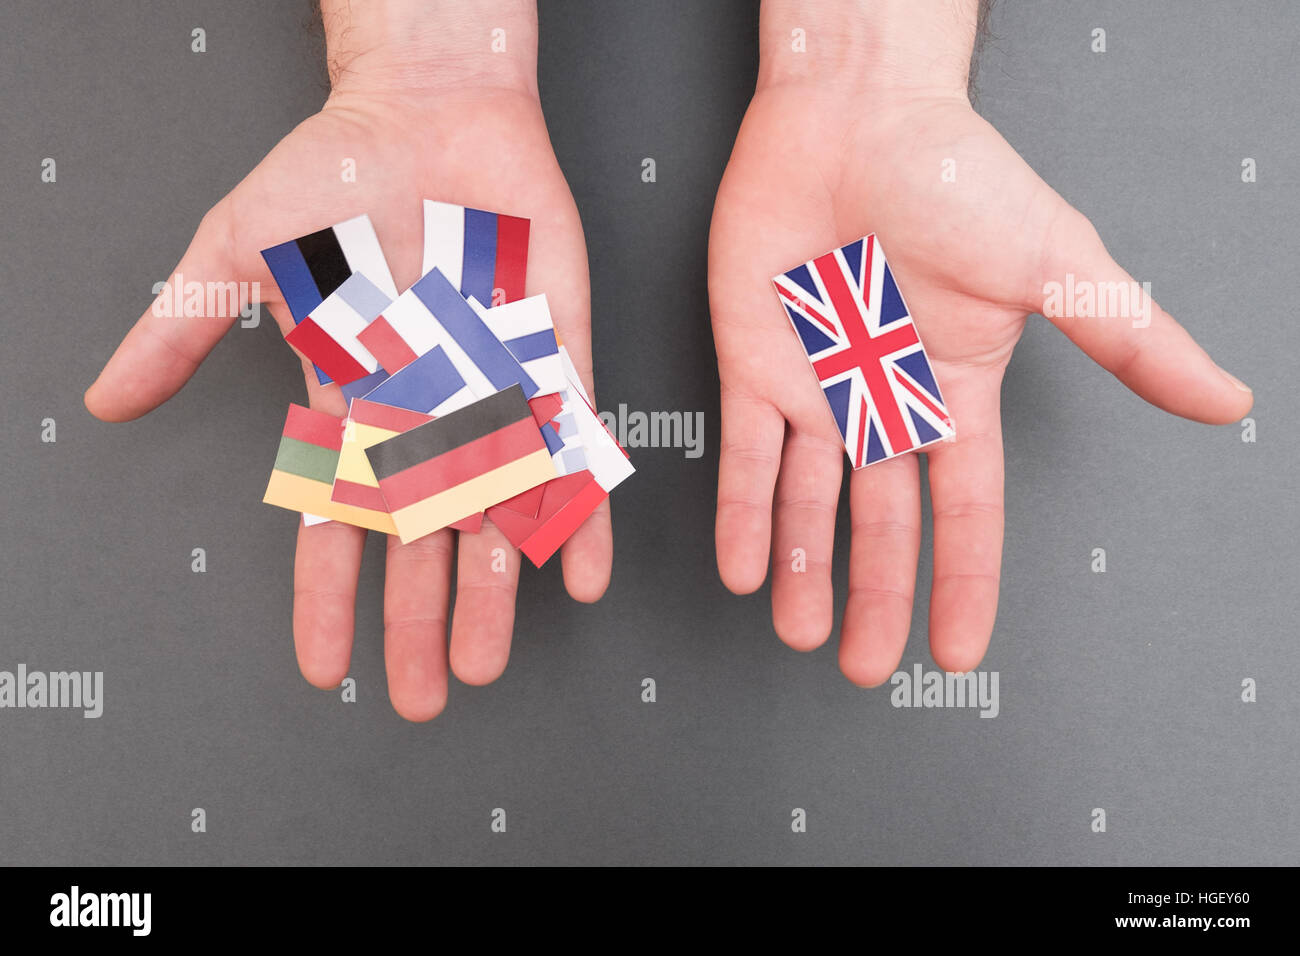 European flags and great britain flag on hands Stock Photo